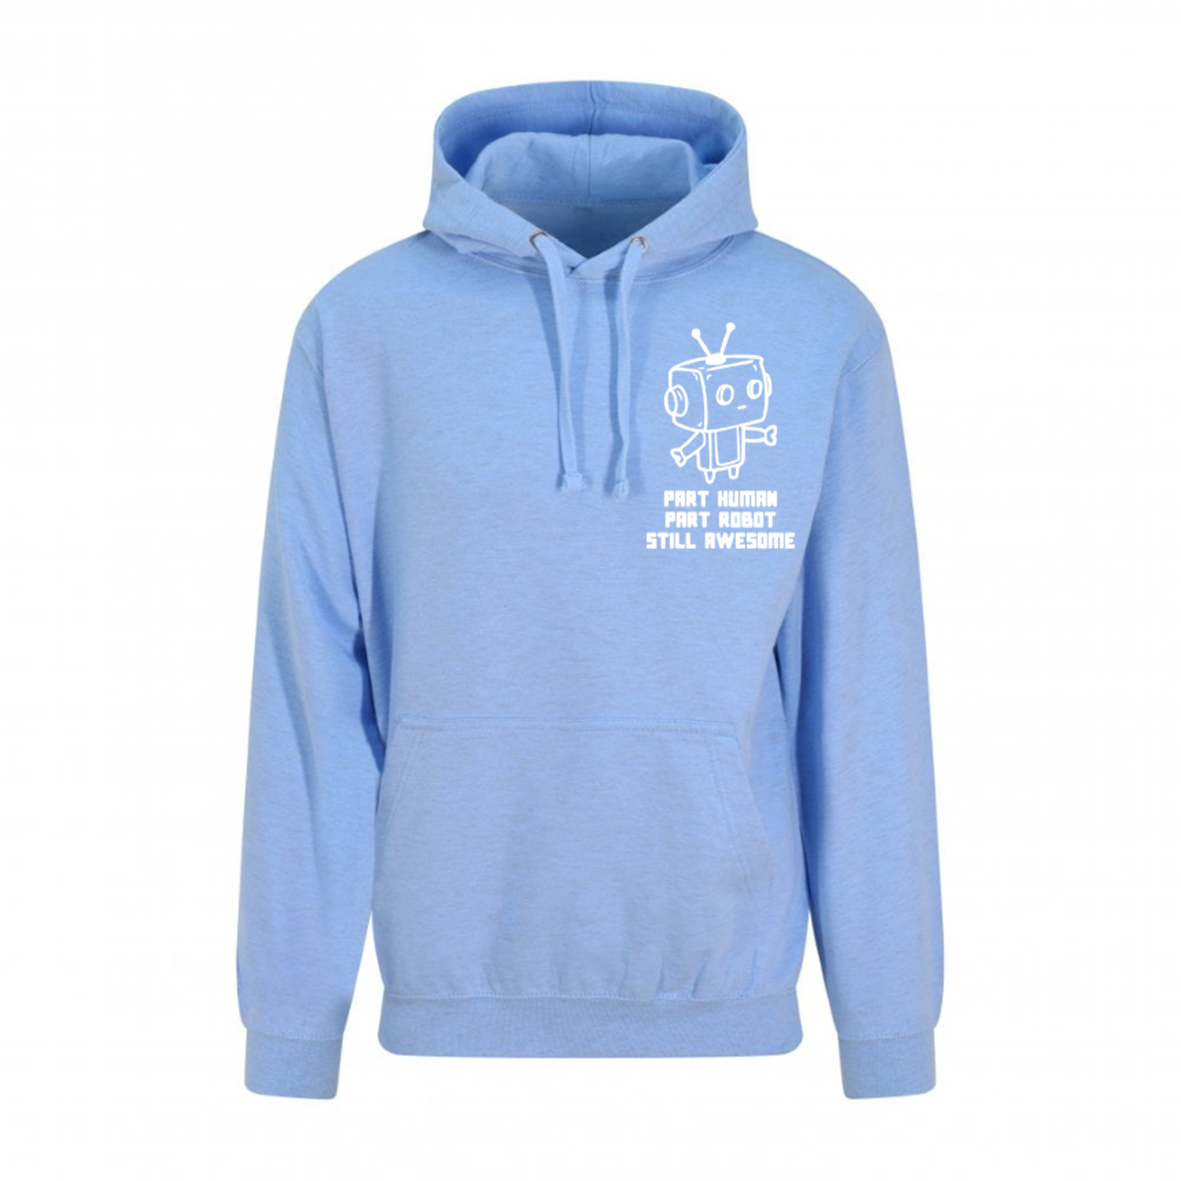 Part Human Part Robot Still Awesome Pastel Hoodie